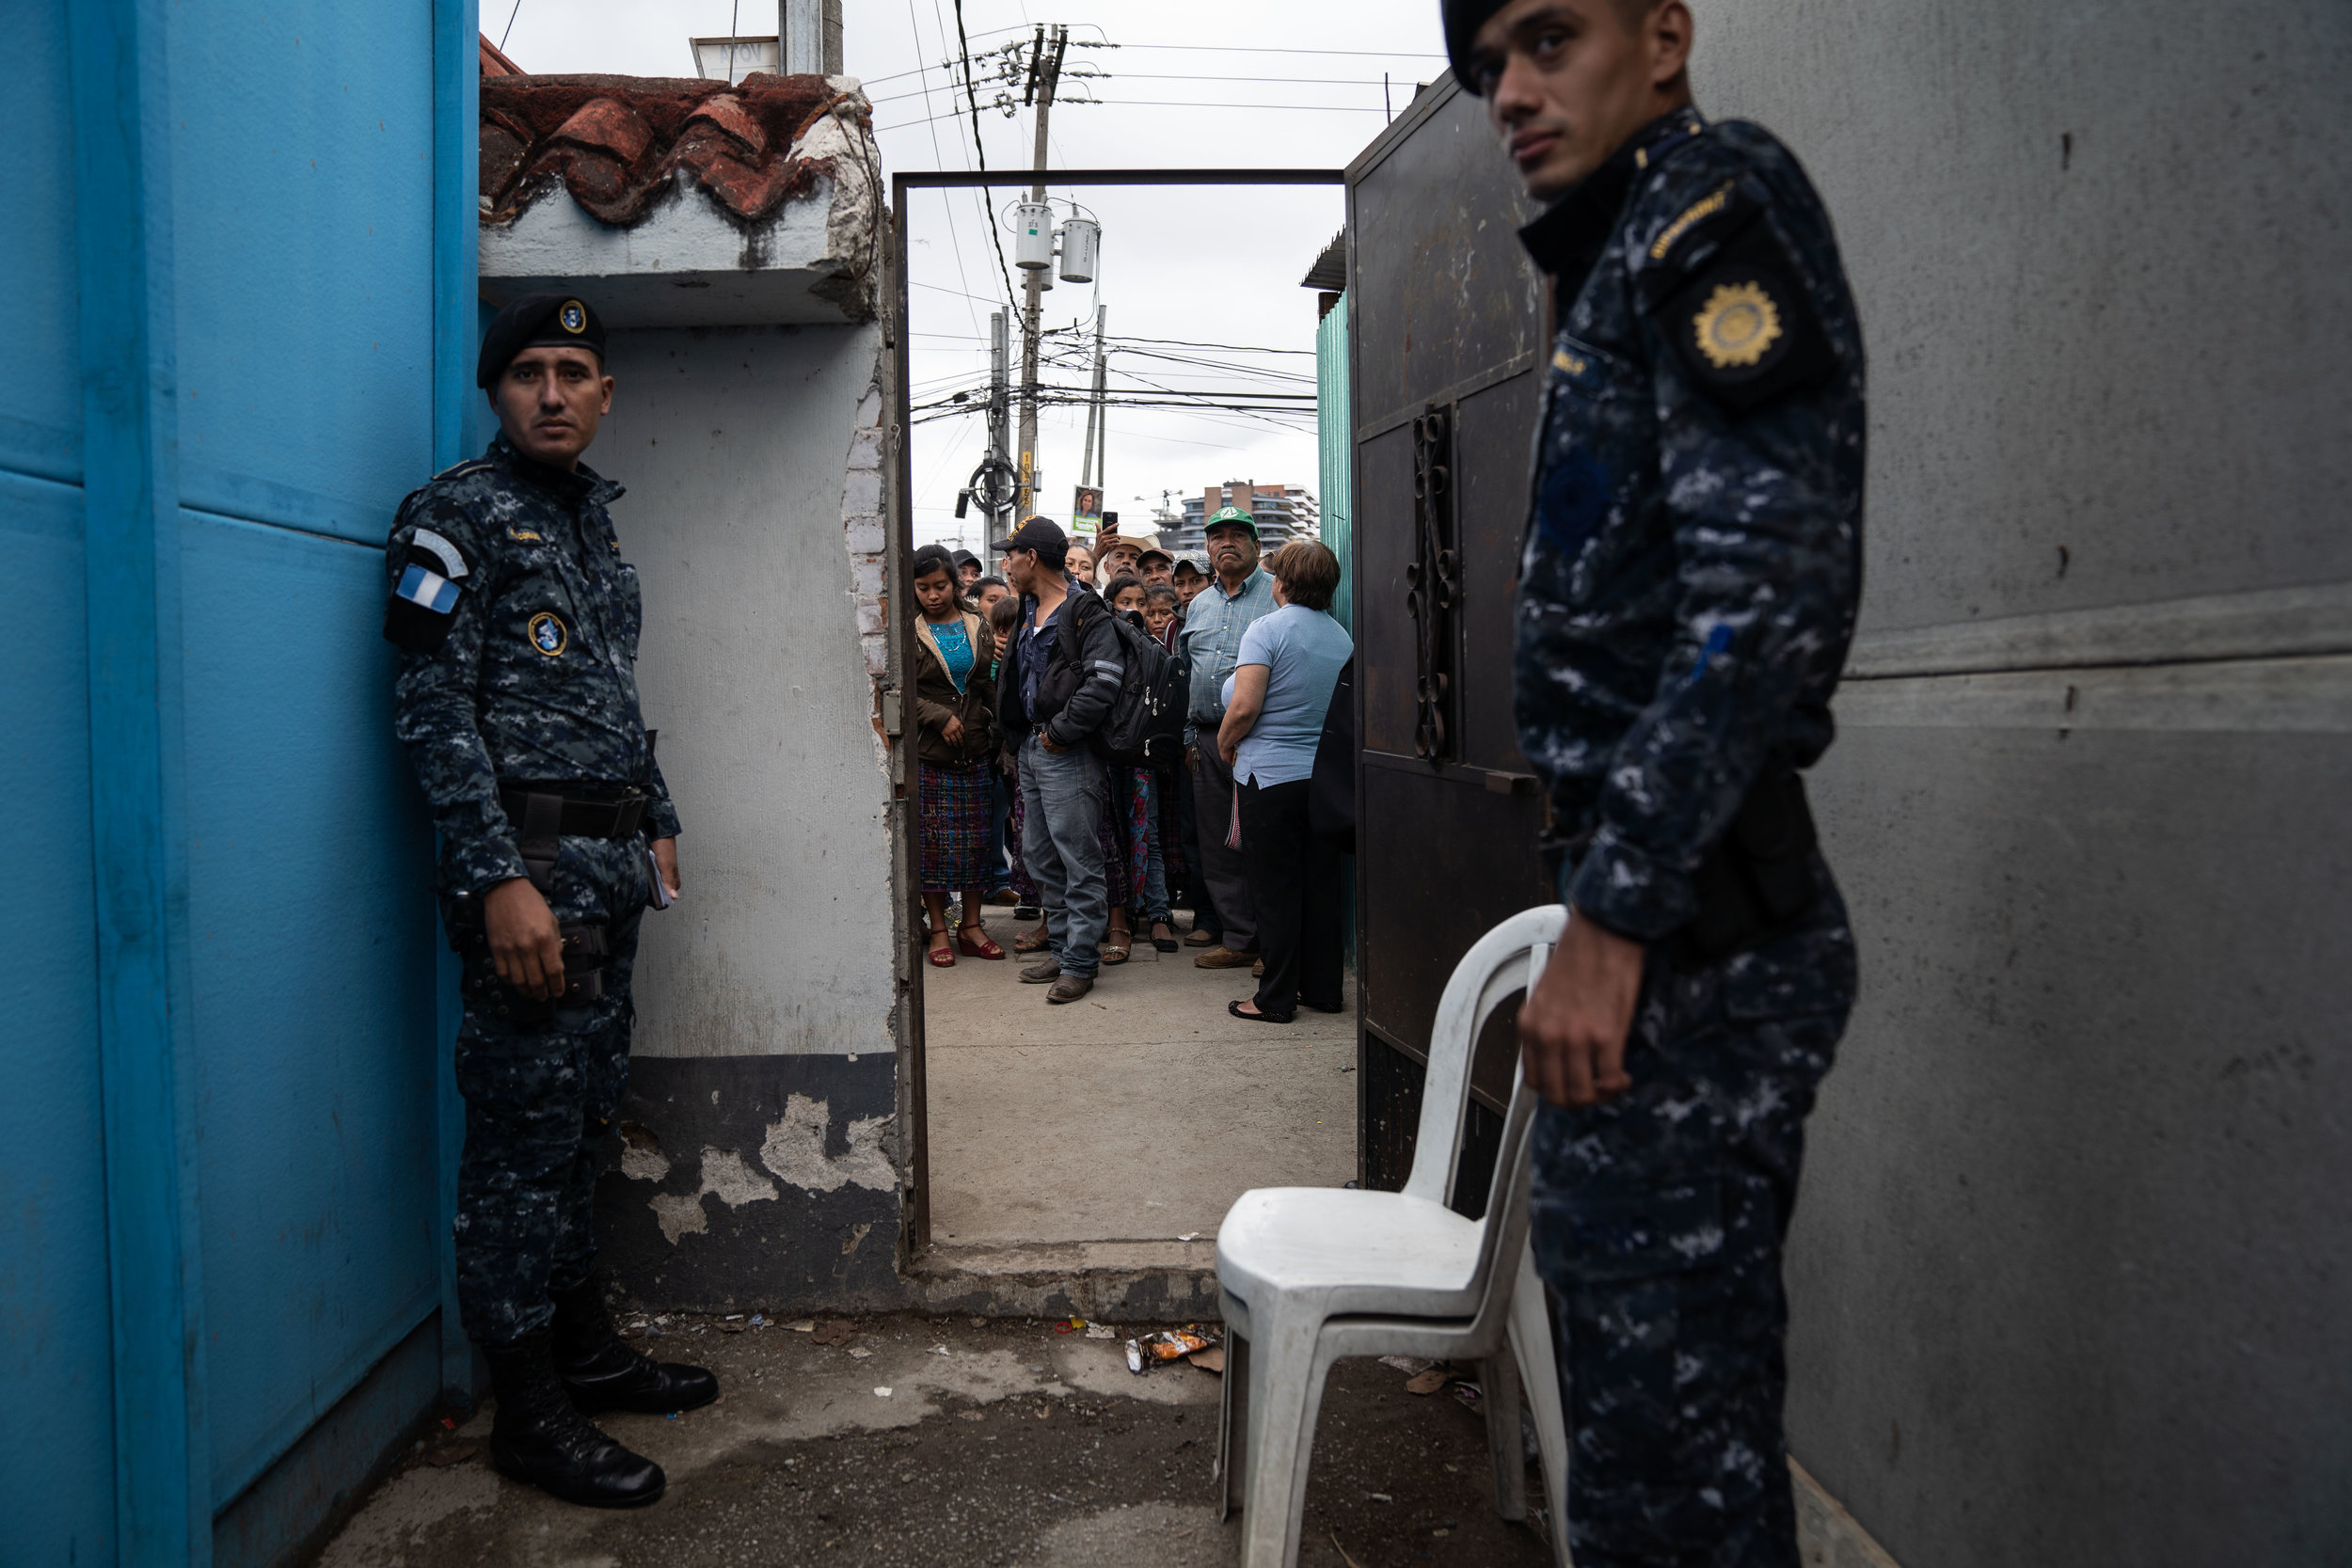   Family members and loved ones wait for Guatemalan deportees to exit a Repatriation Center in Guatemala City in May, 2019.  